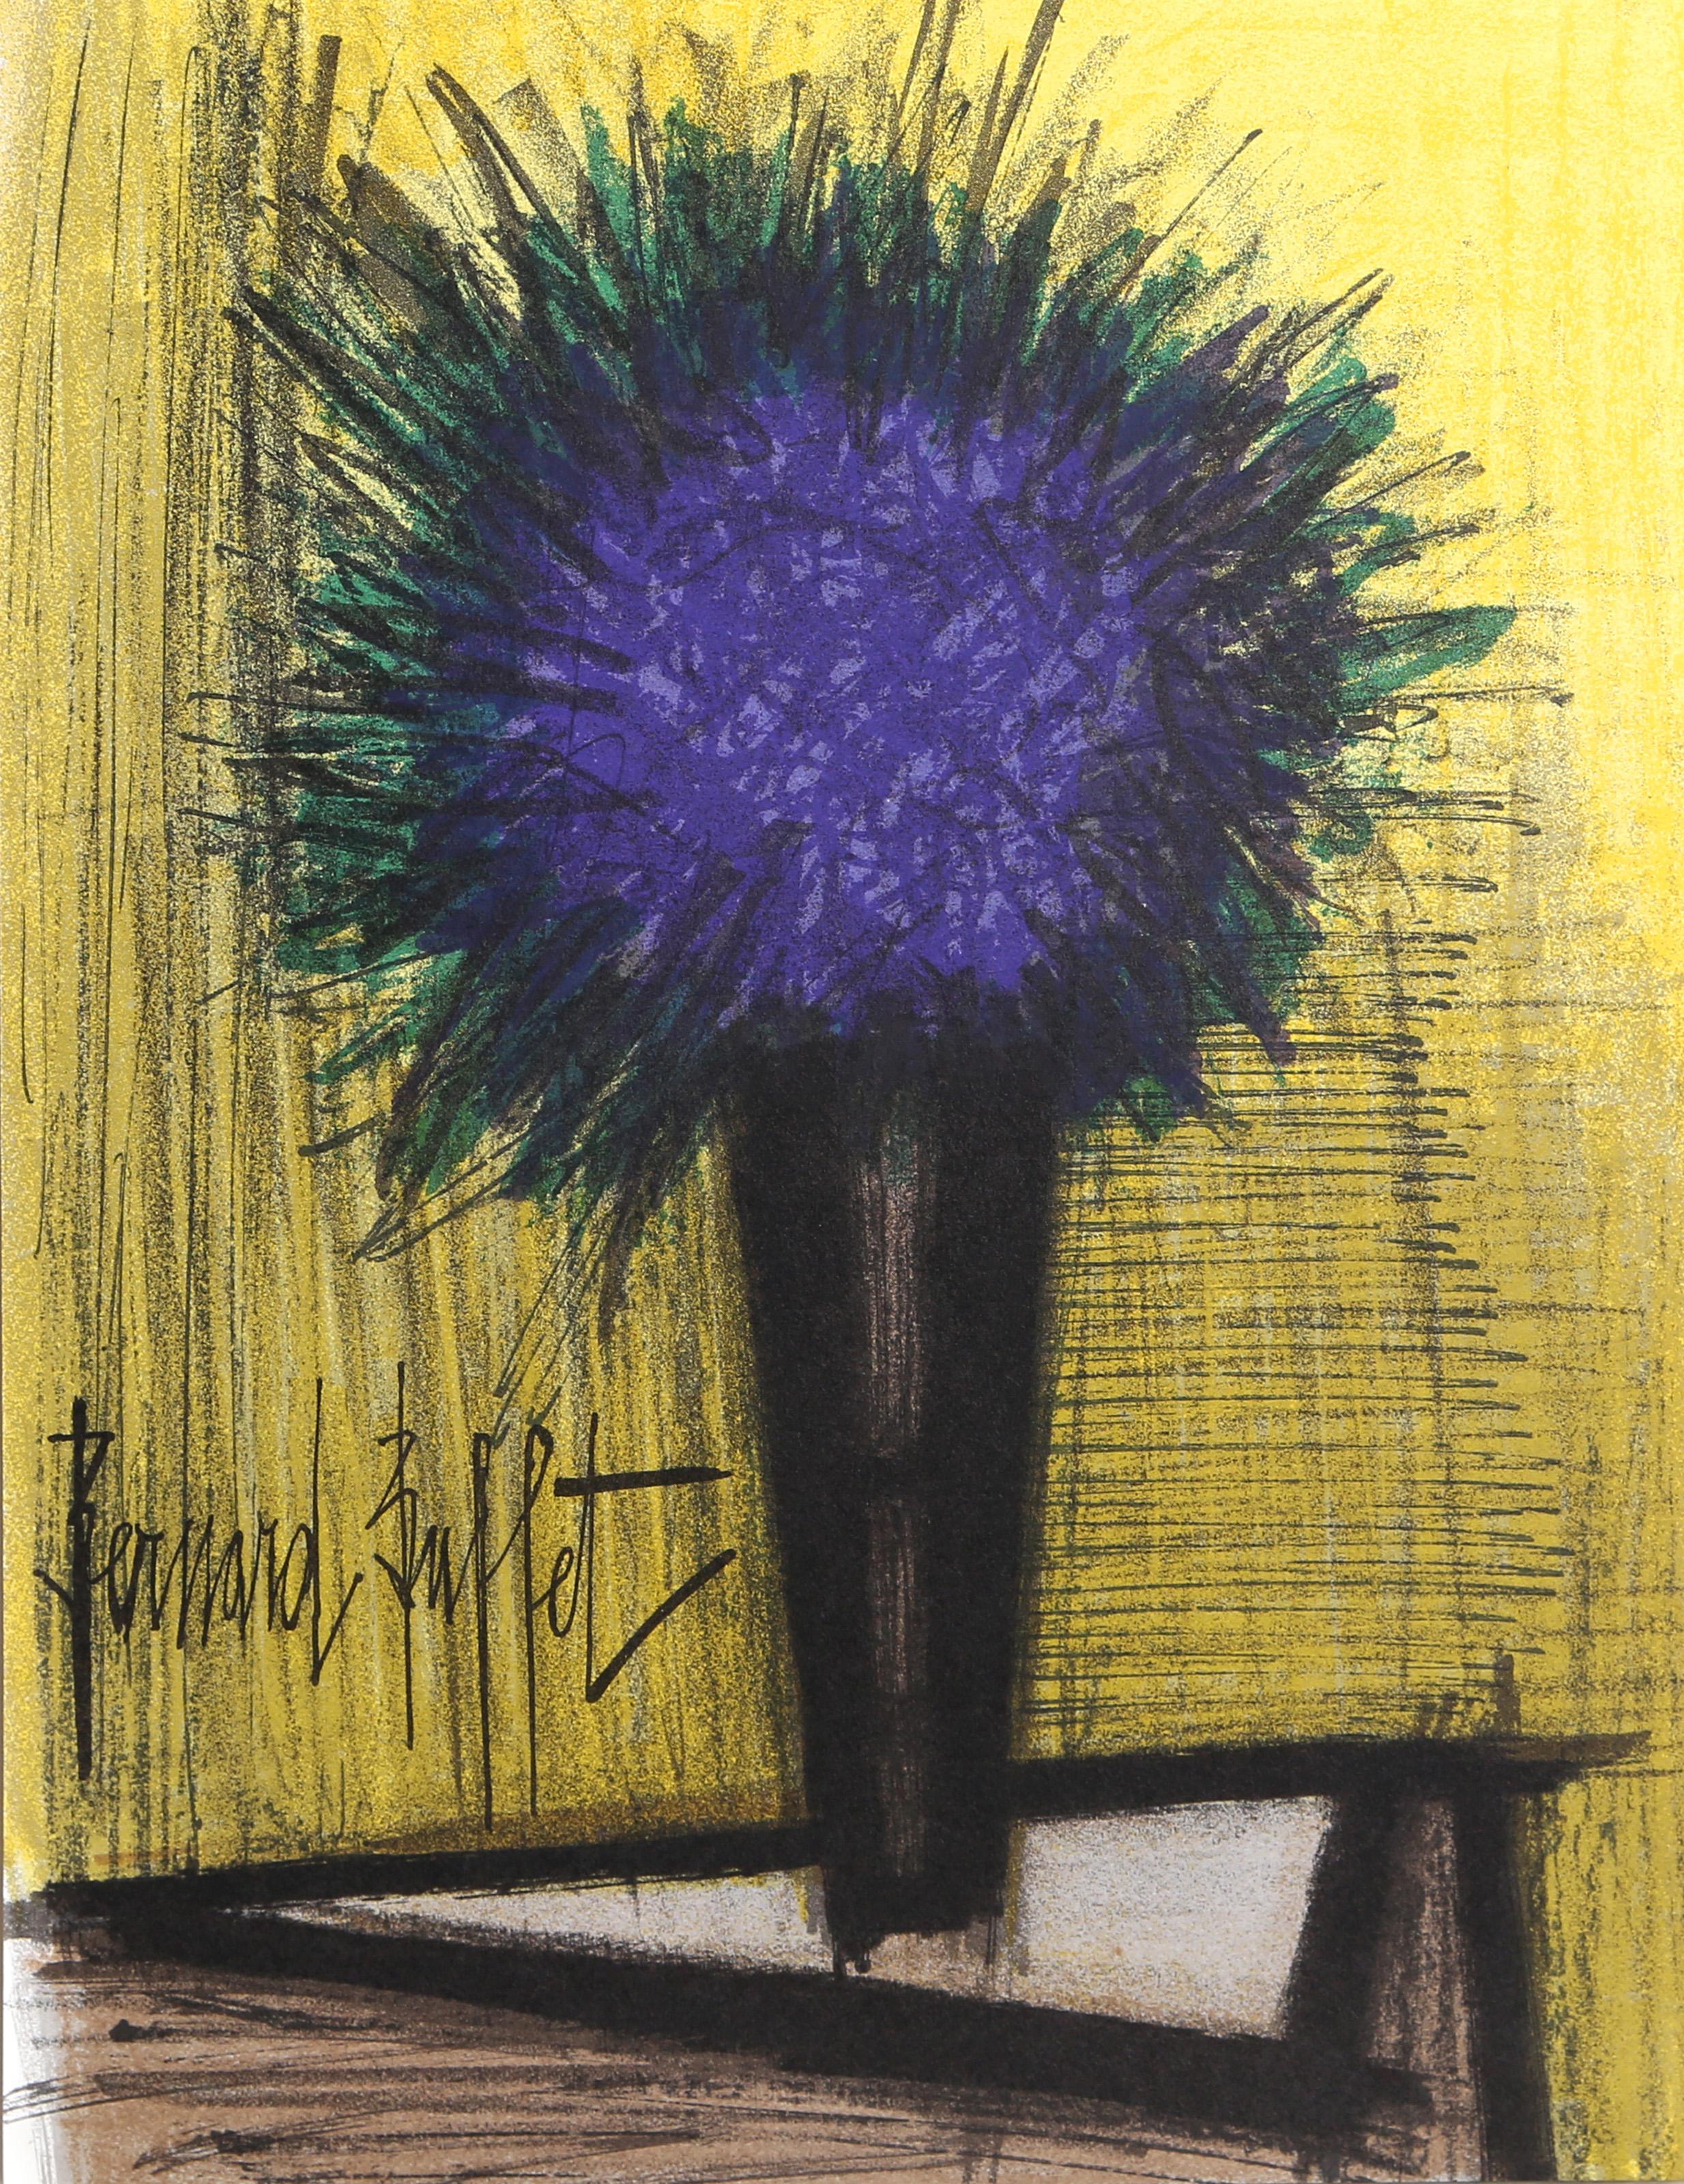 Bernard Buffet, French (1928 - 1999) -  Purple Flower. Year: 1968, Medium: Lithograph, signed in the plate, Size: 14  x 10 in. (35.56  x 25.4 cm) 